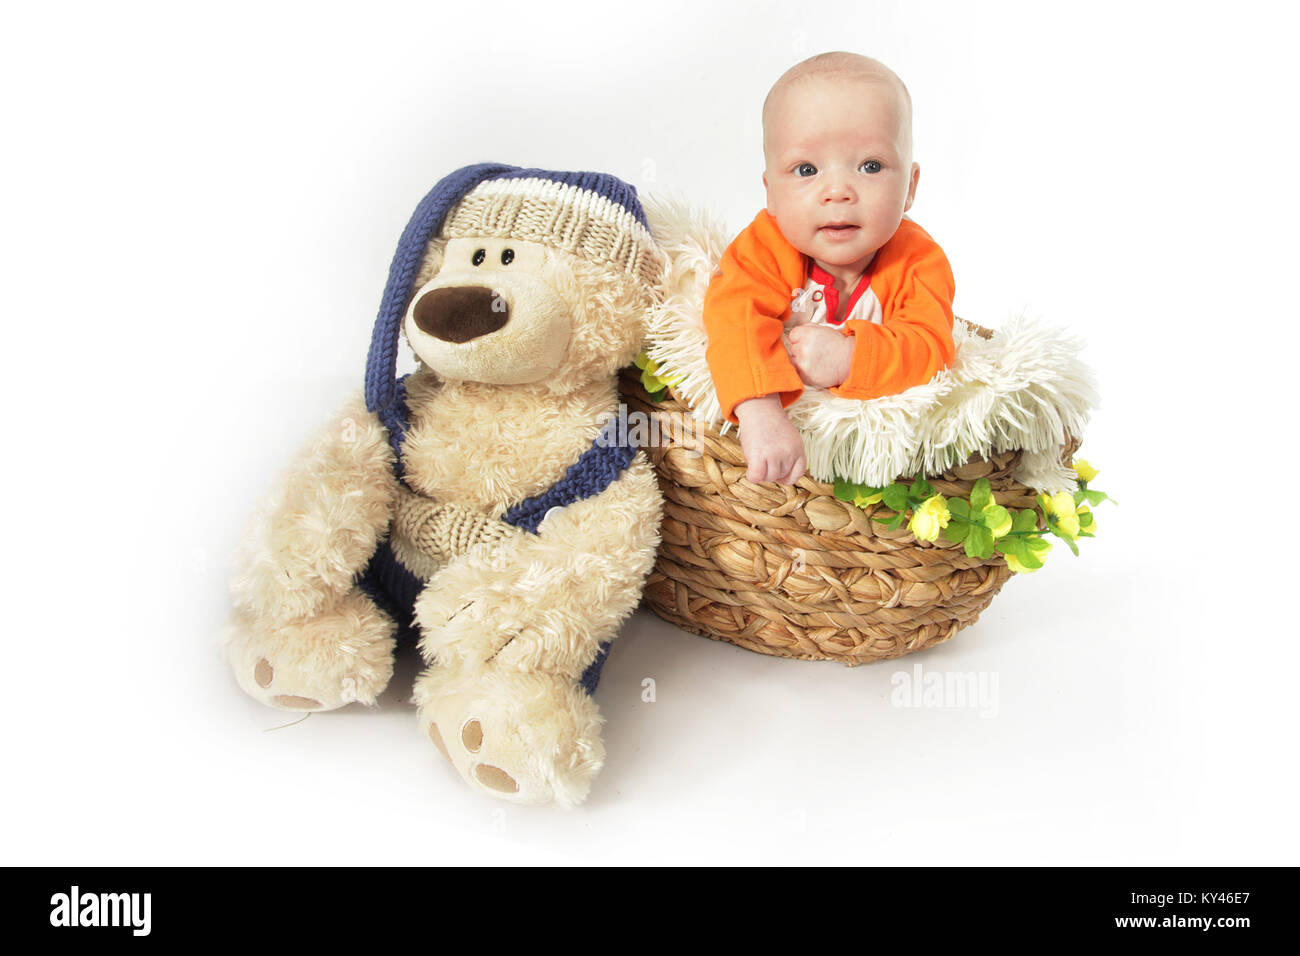 baby boy 2 months old, playing in wicker basket with teddy Stock Photo